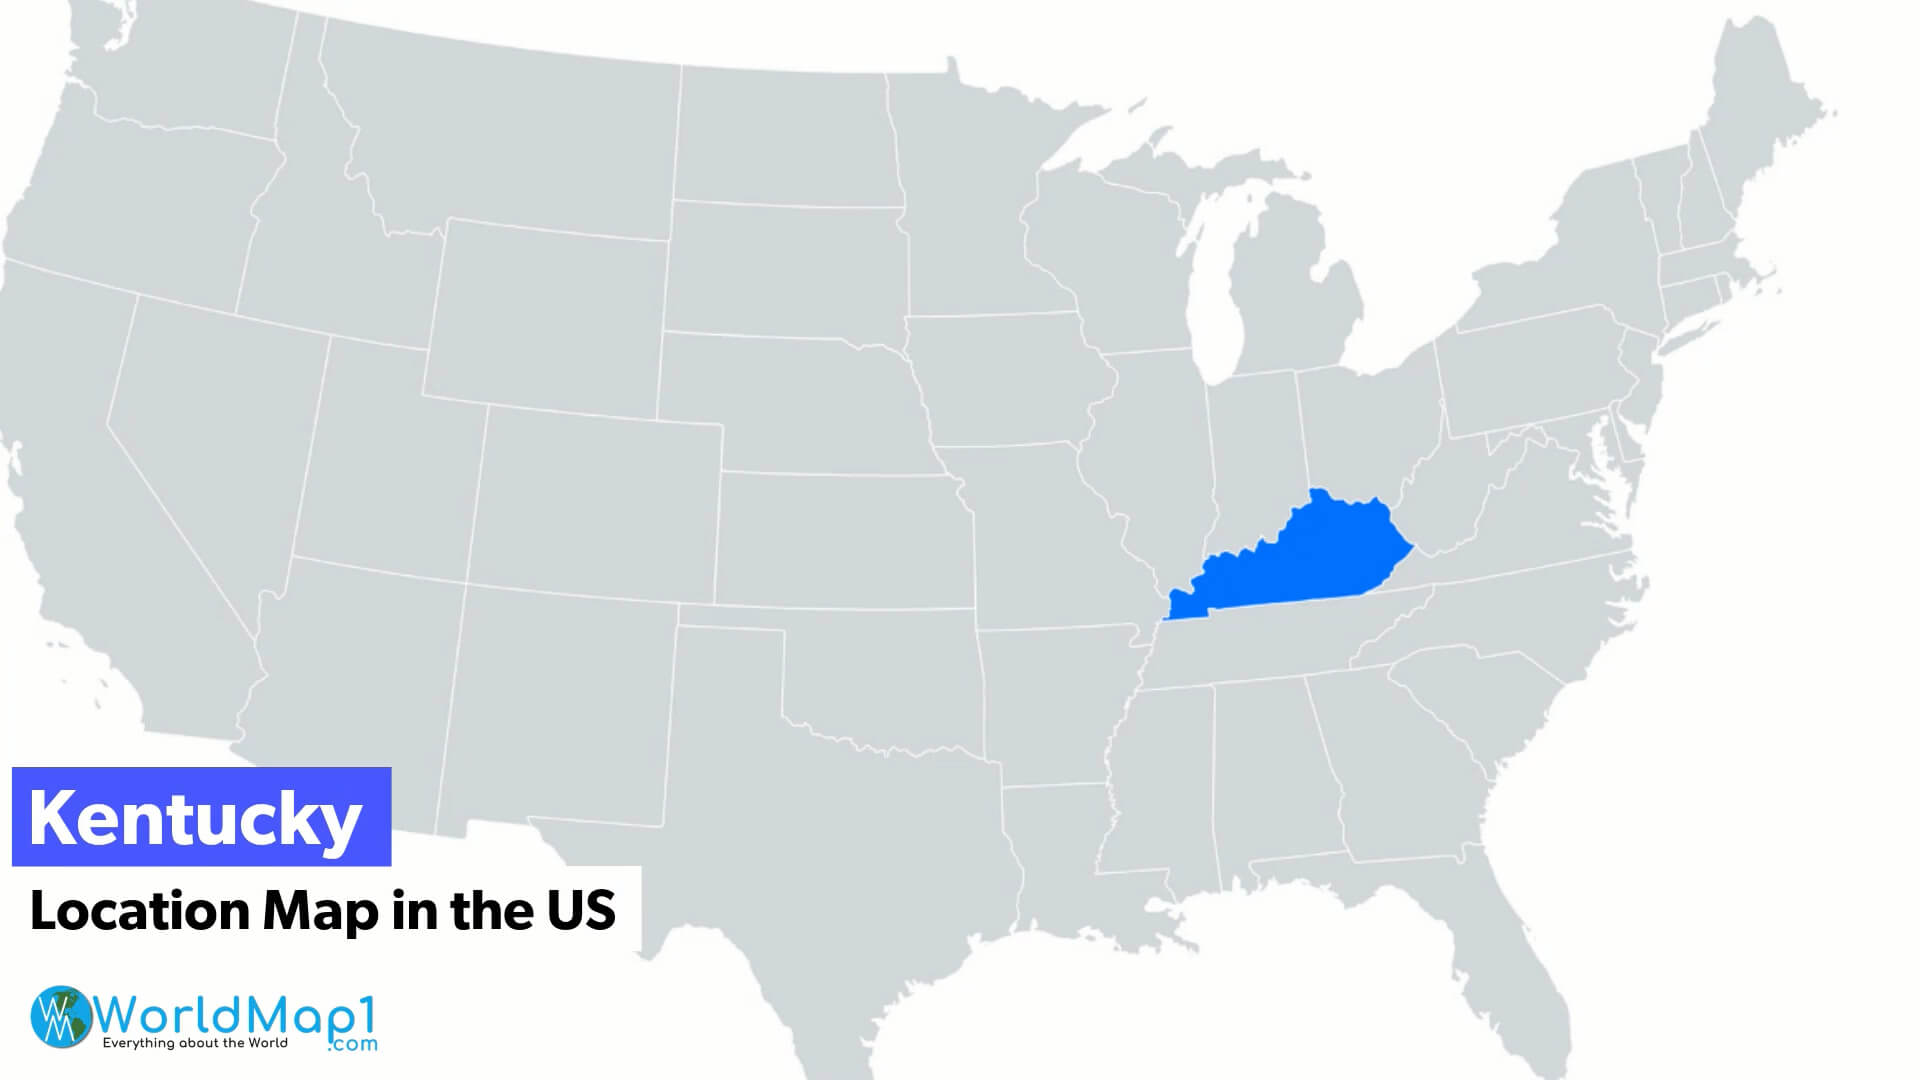 Kentucky Location Map in the US